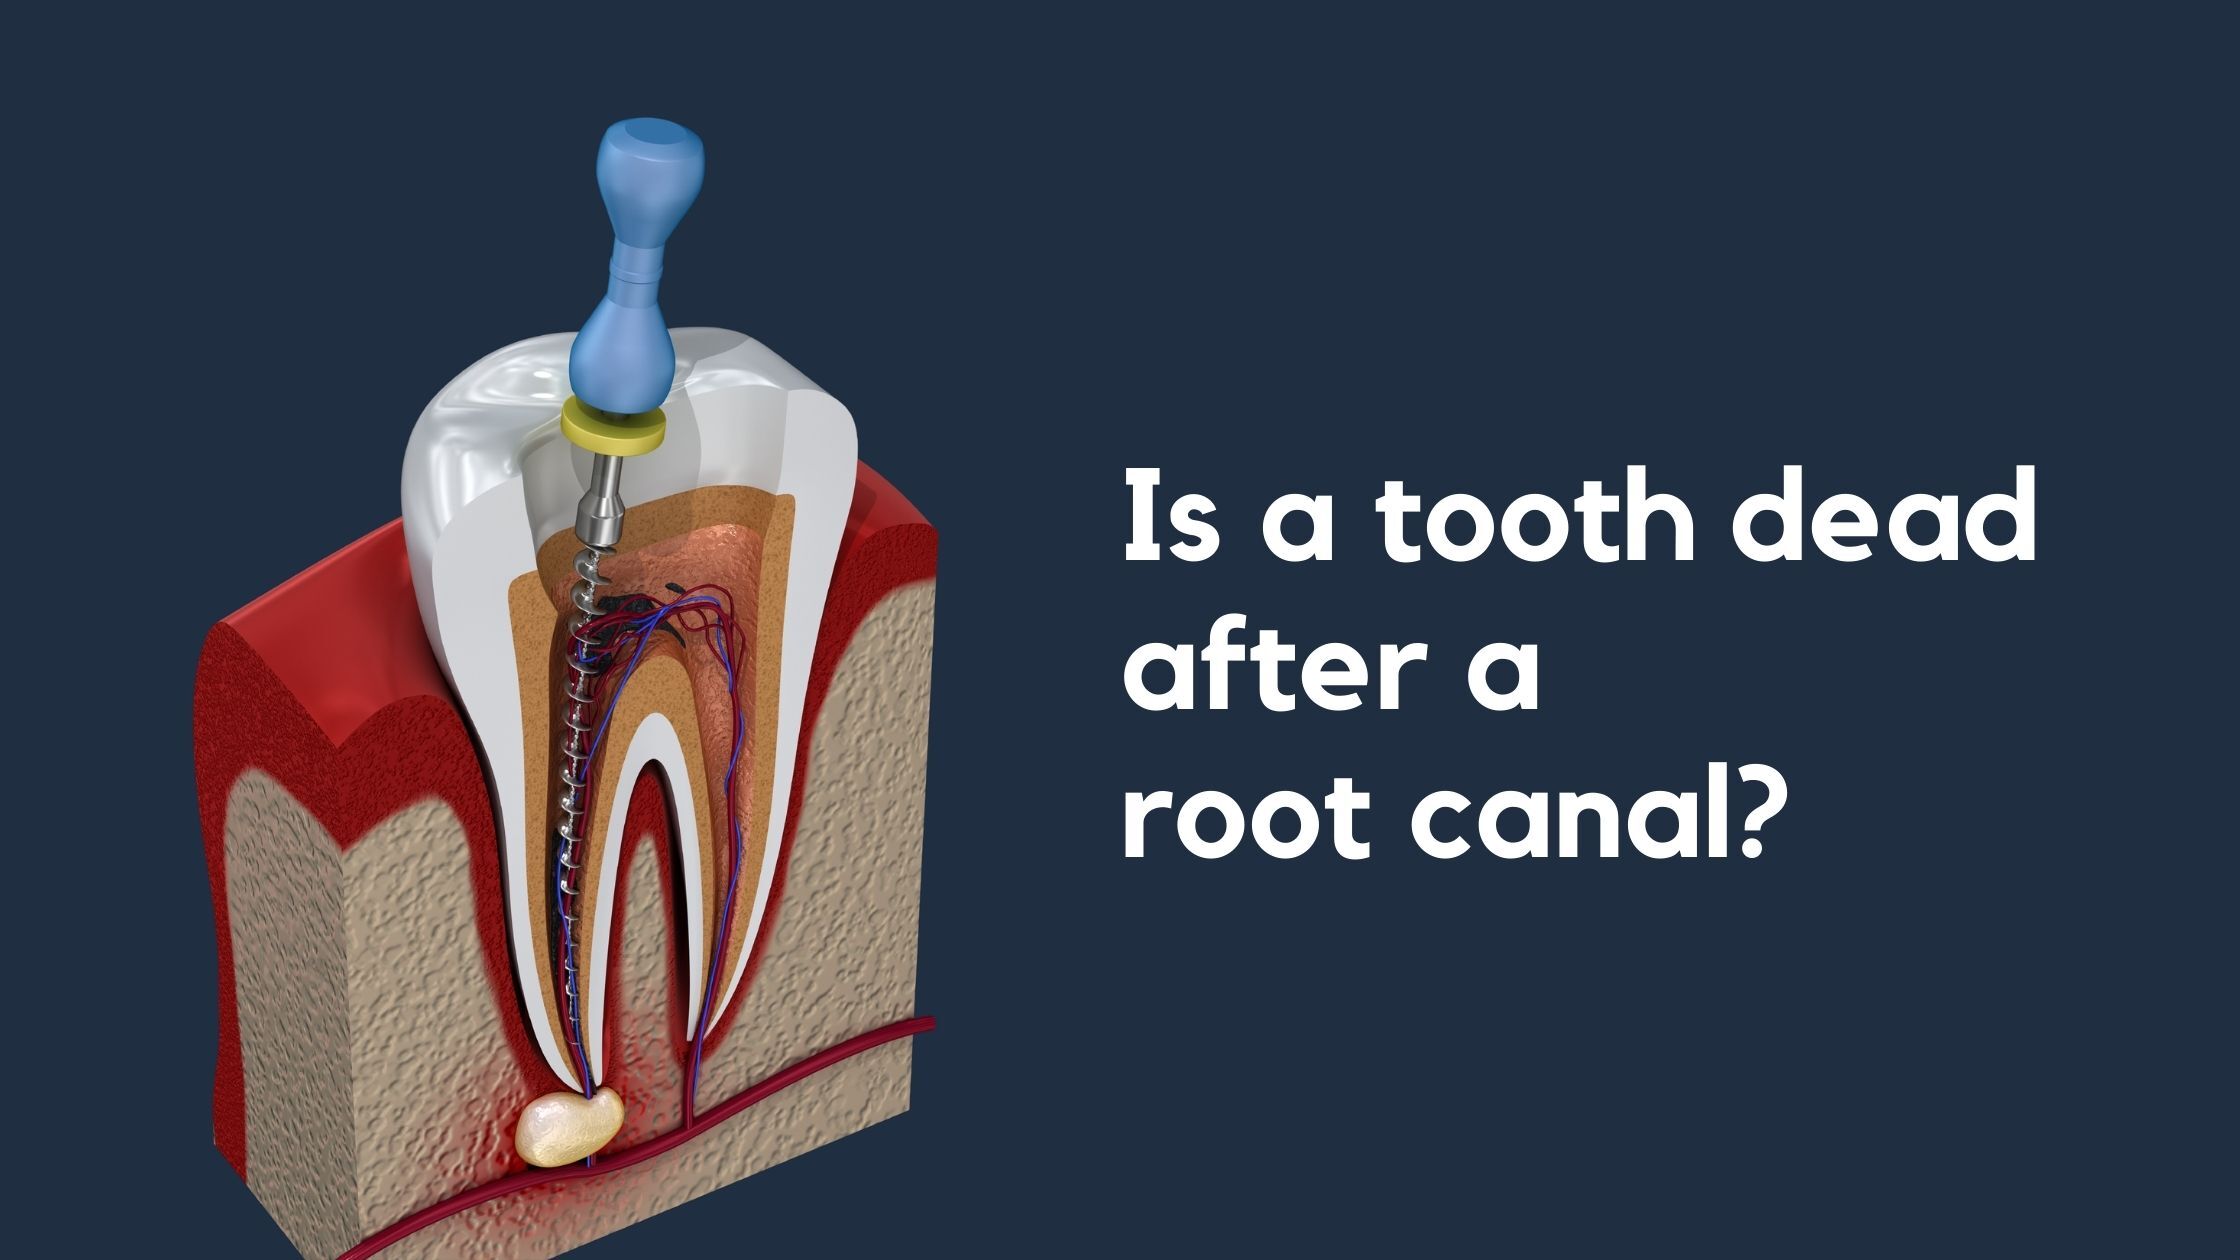 Is a tooth dead after a root canal?